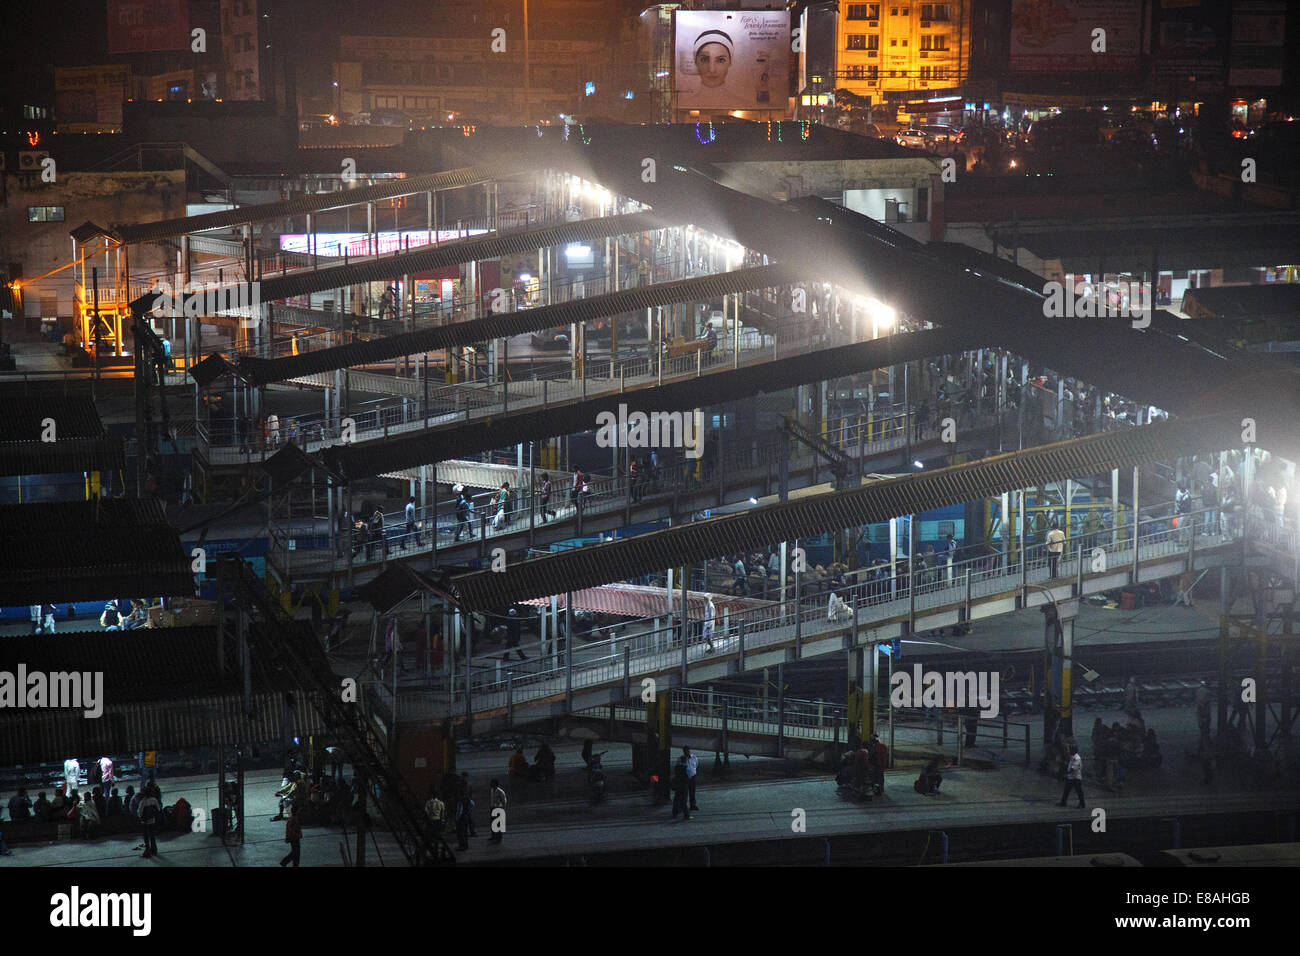 A night view of the platforms at the main train station in Patna, Bihar, India Stock Photo